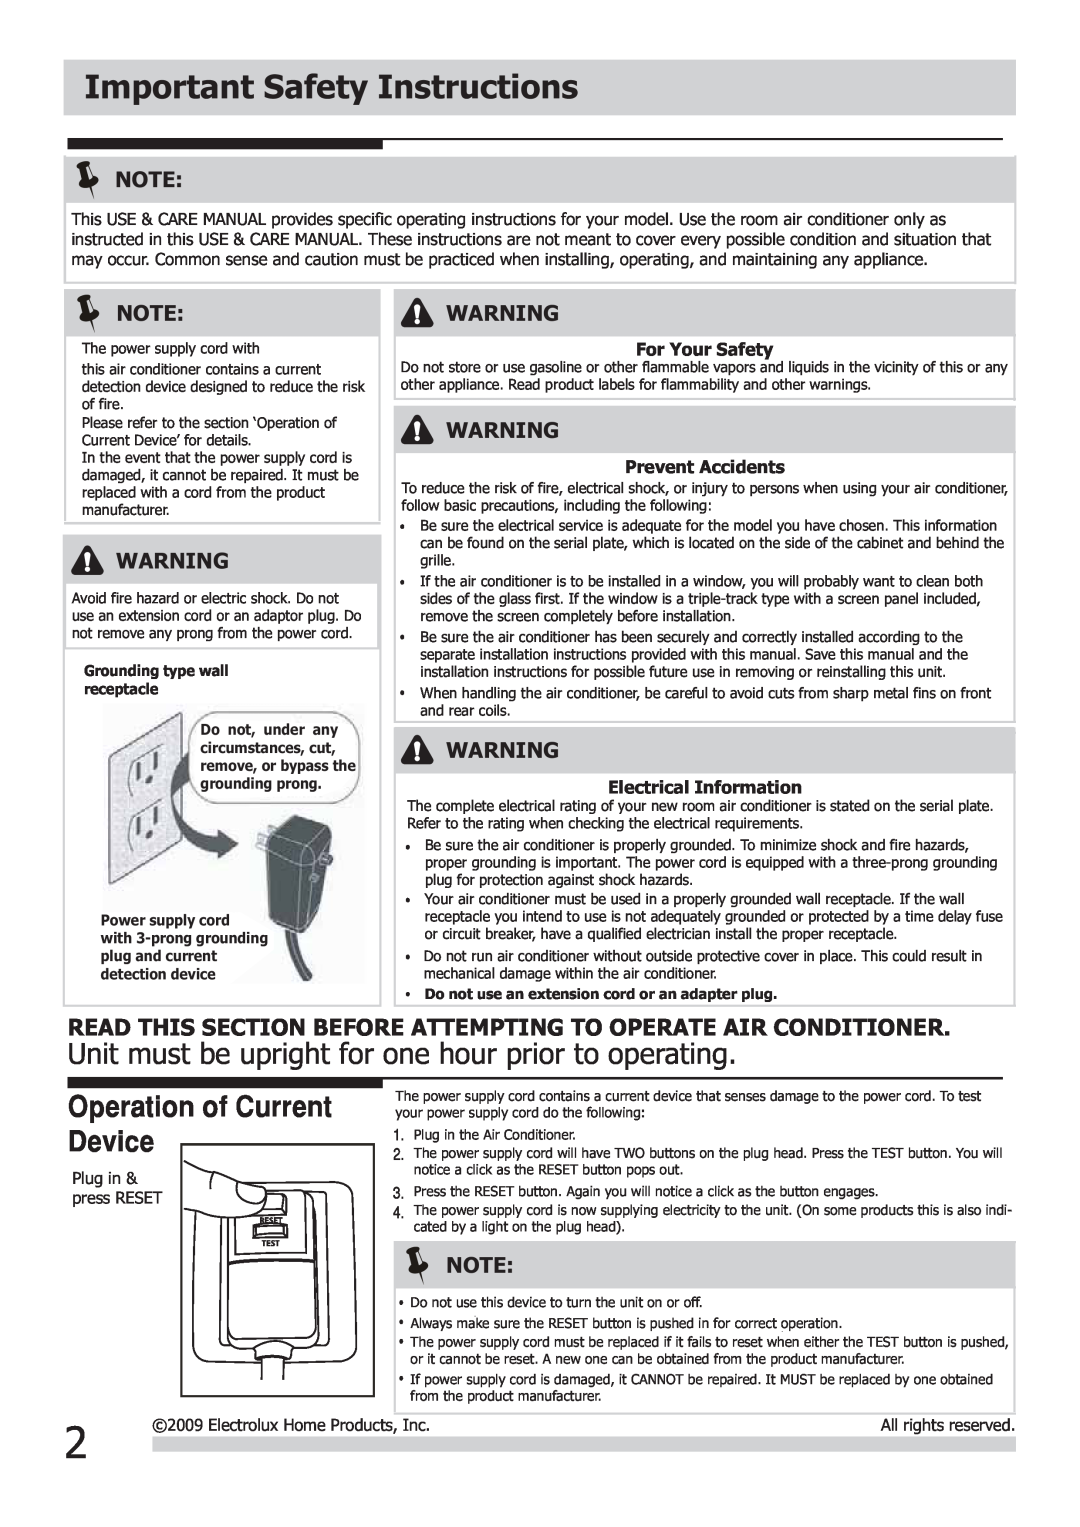 Frigidaire FRA082AT7 warranty Important Safety Instructions, For Your Safety, Prevent Accidents, Electrical Information 